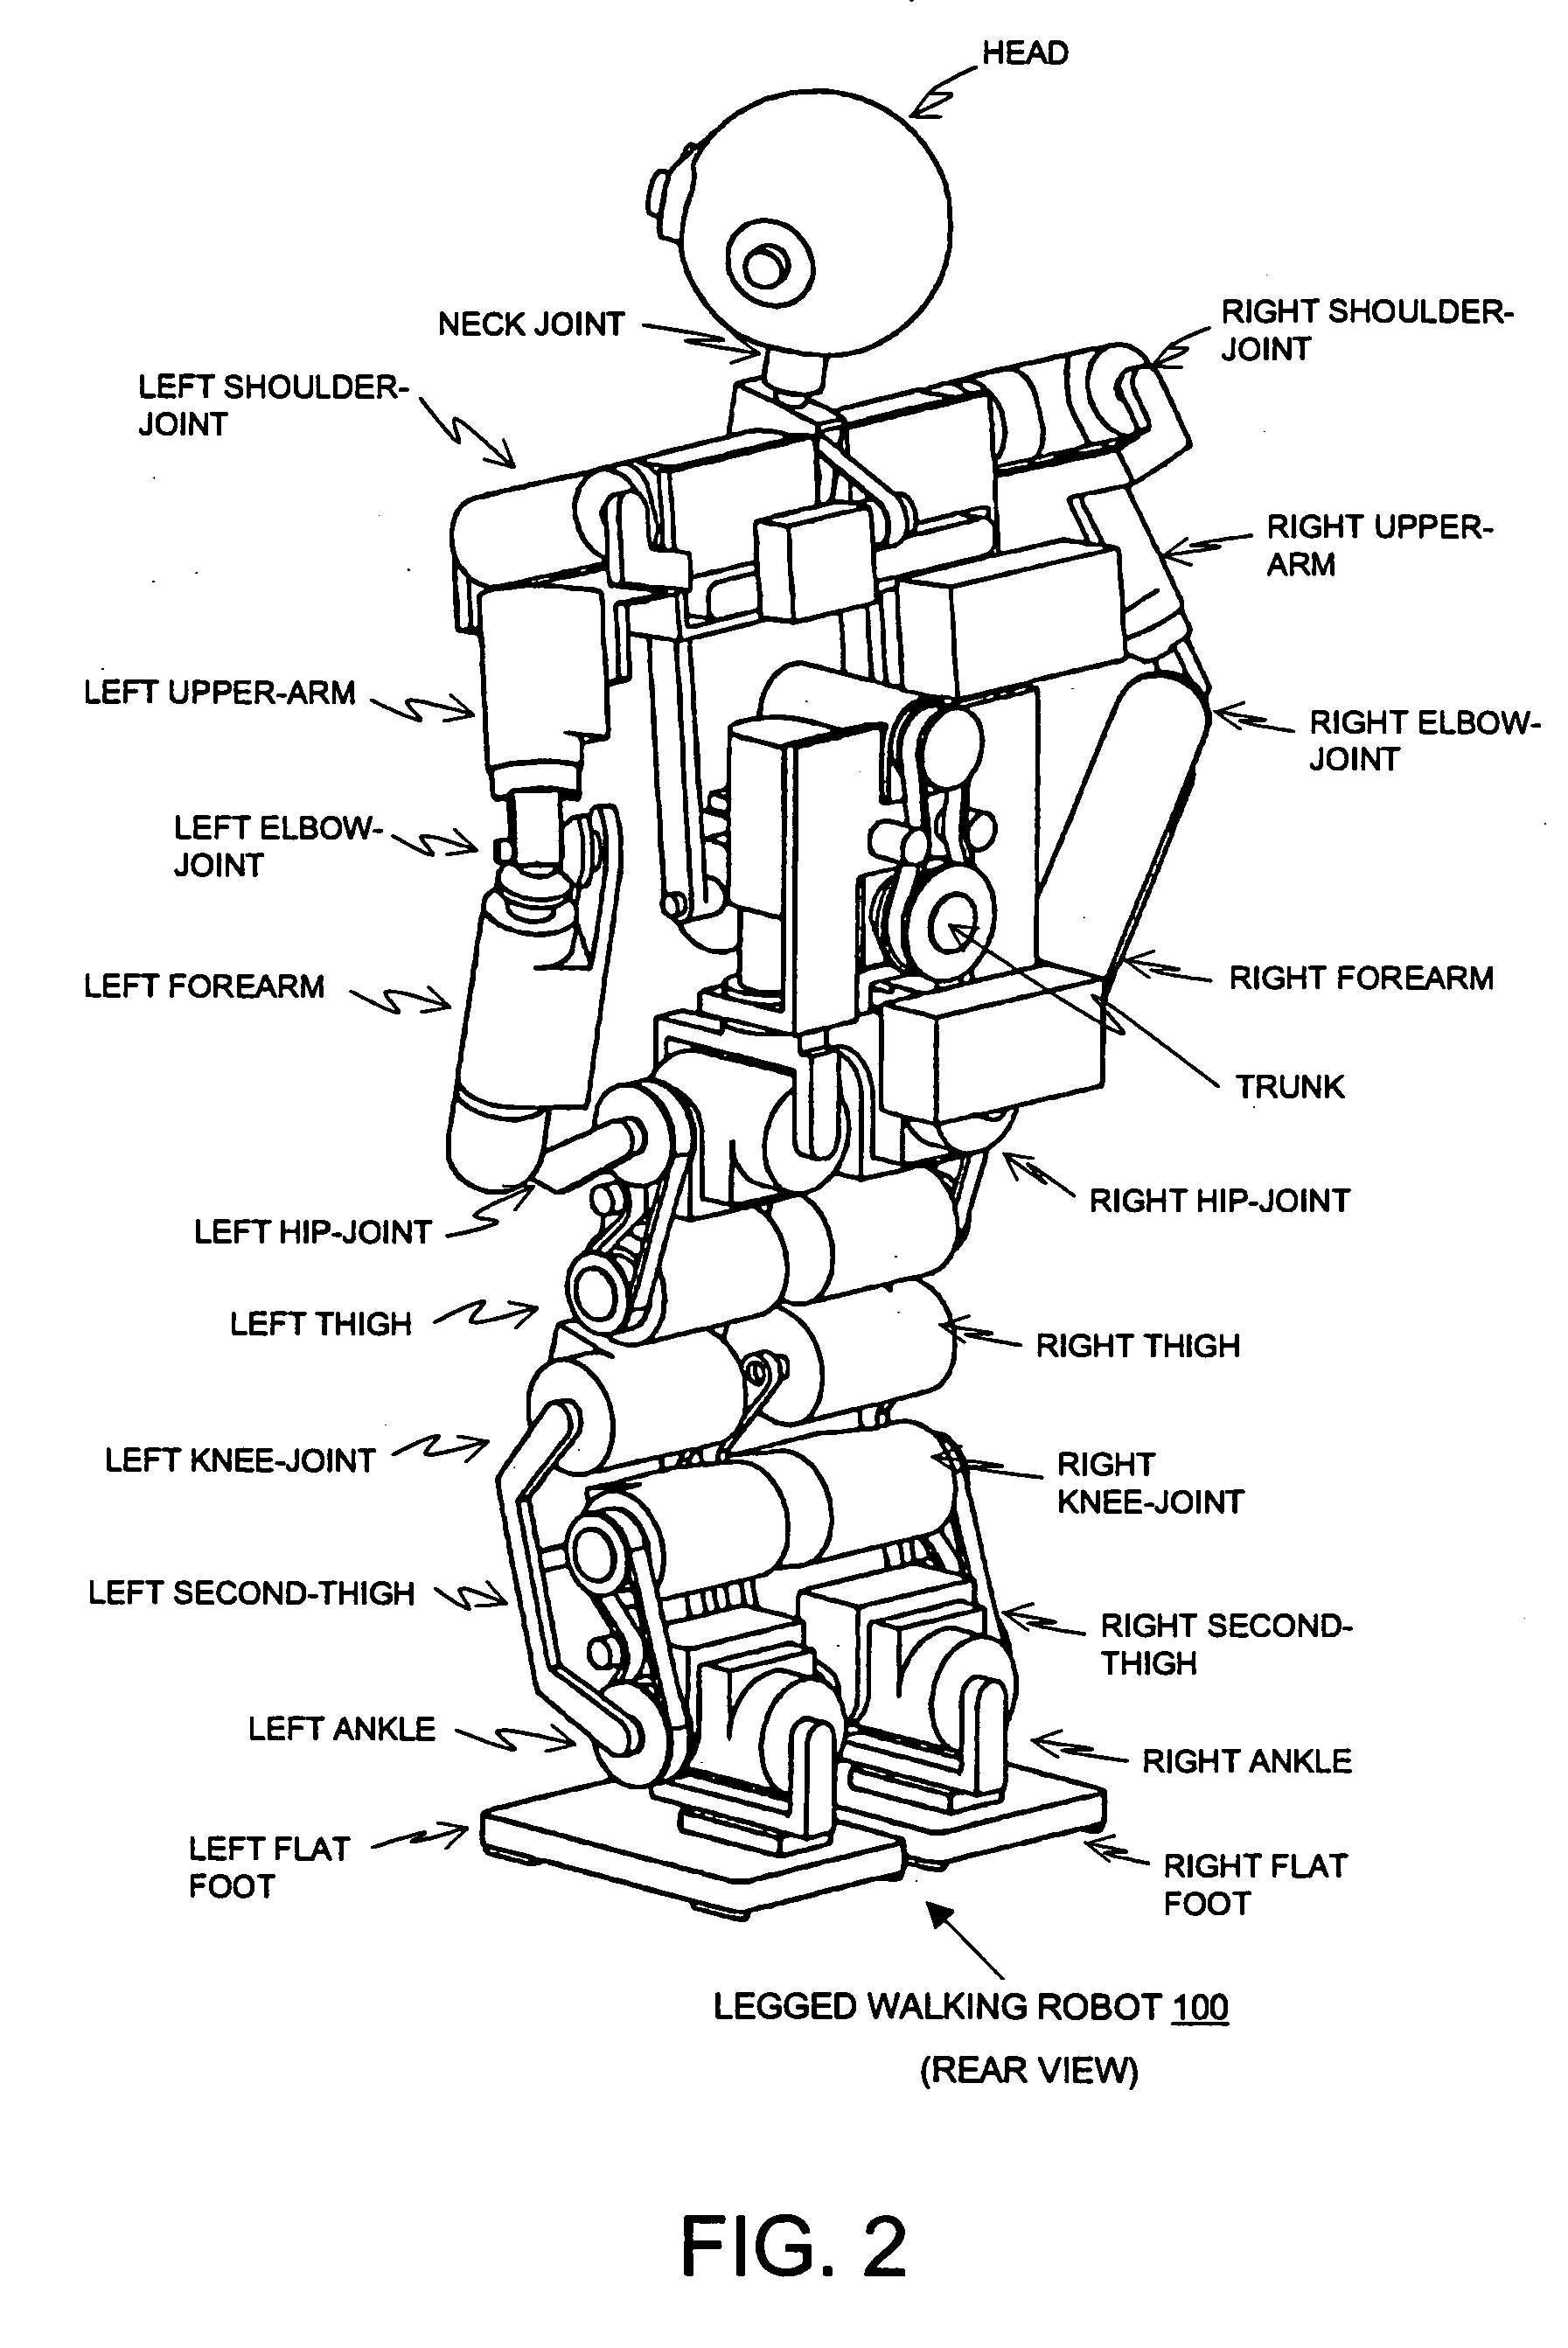 Legged mobile robot and method of controlling operation of the robot